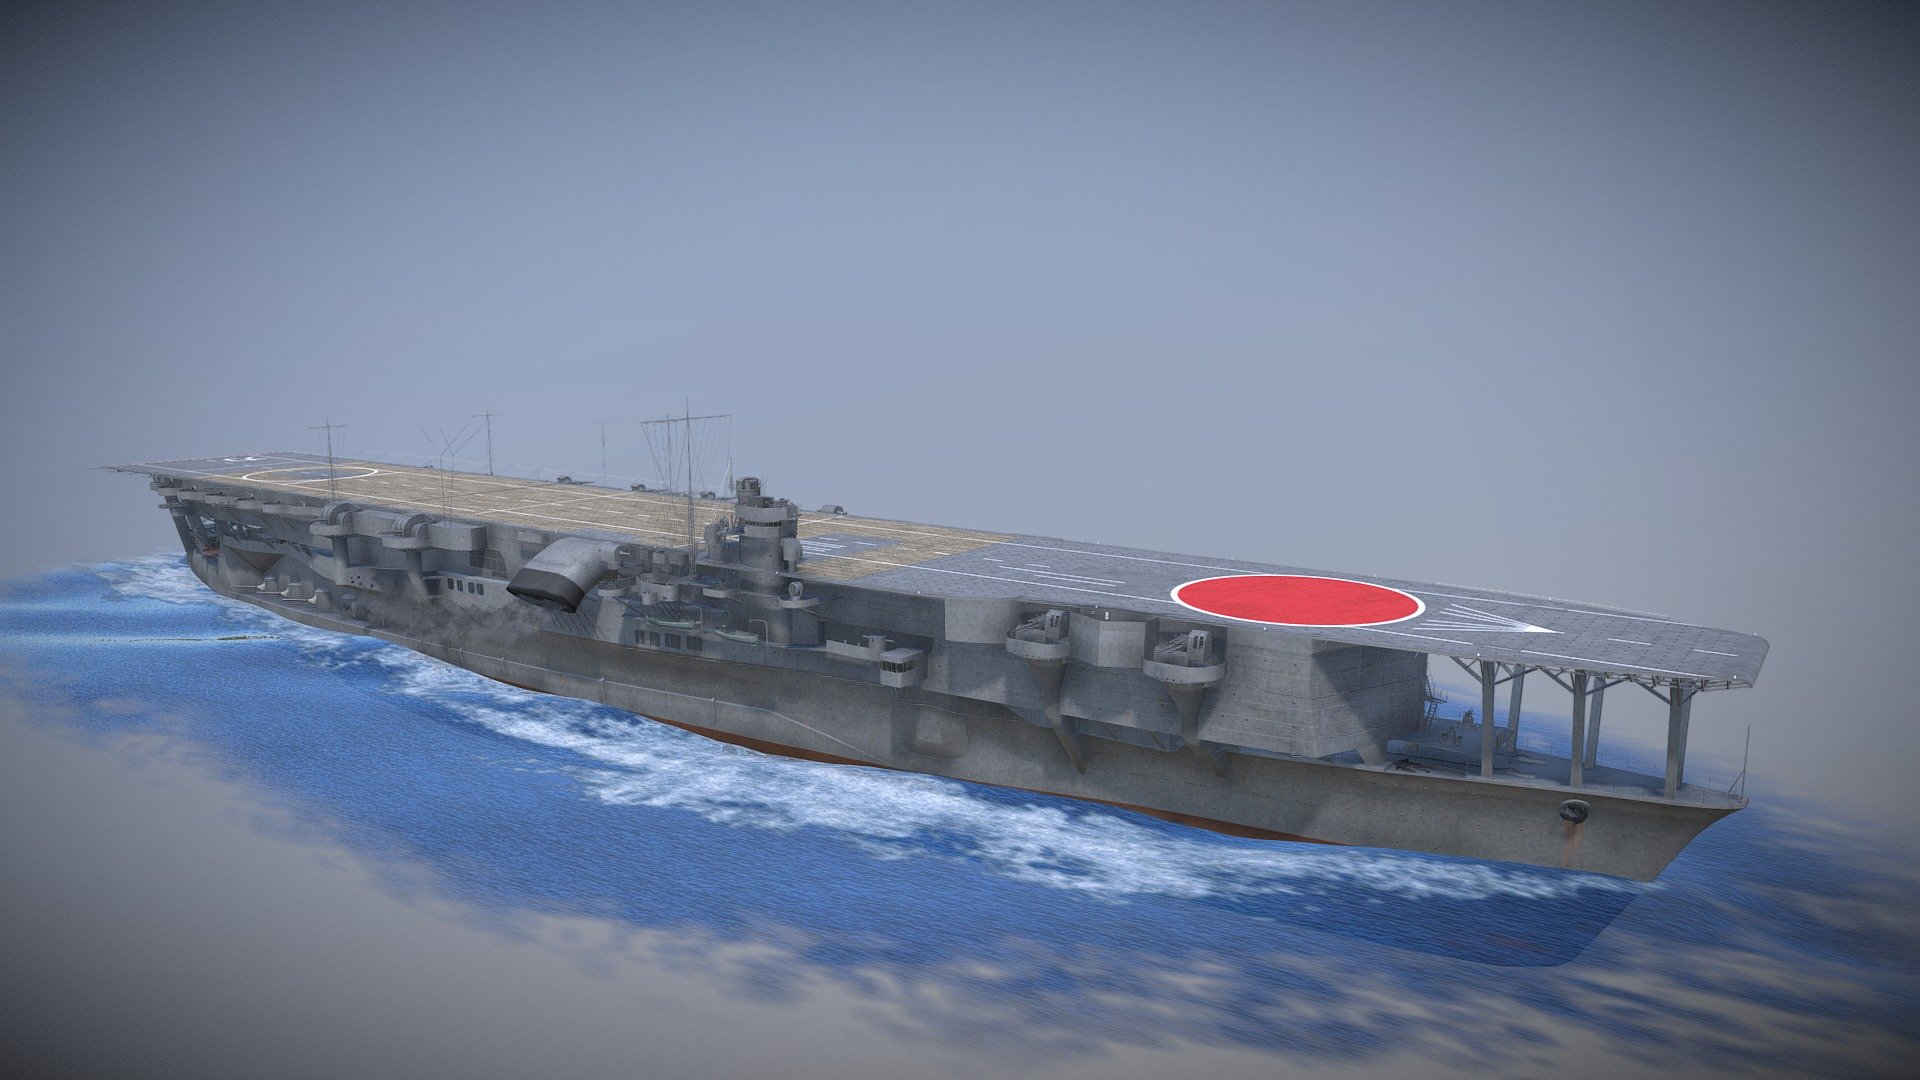 The IJN Kaga was an aircraft carrier of the Imperial Japanese Navy during World War 2, Originally intended to be one of two Tosa-class battleships, she was converted under the terms of the Washington Naval Treaty to an aircraft carrier. She sank during the Battle of Midway.
Kaga was modernized in 1933–1935, increasing her top speed, improving her exhaust systems, and adapting her flight decks to more modern, heavier aircraft.

Additional renders can be viewed here: www.artstation.com/artwork/Xnvqd3 - Kaga - Buy Royalty Free 3D model by ThomasBeerens 3d model